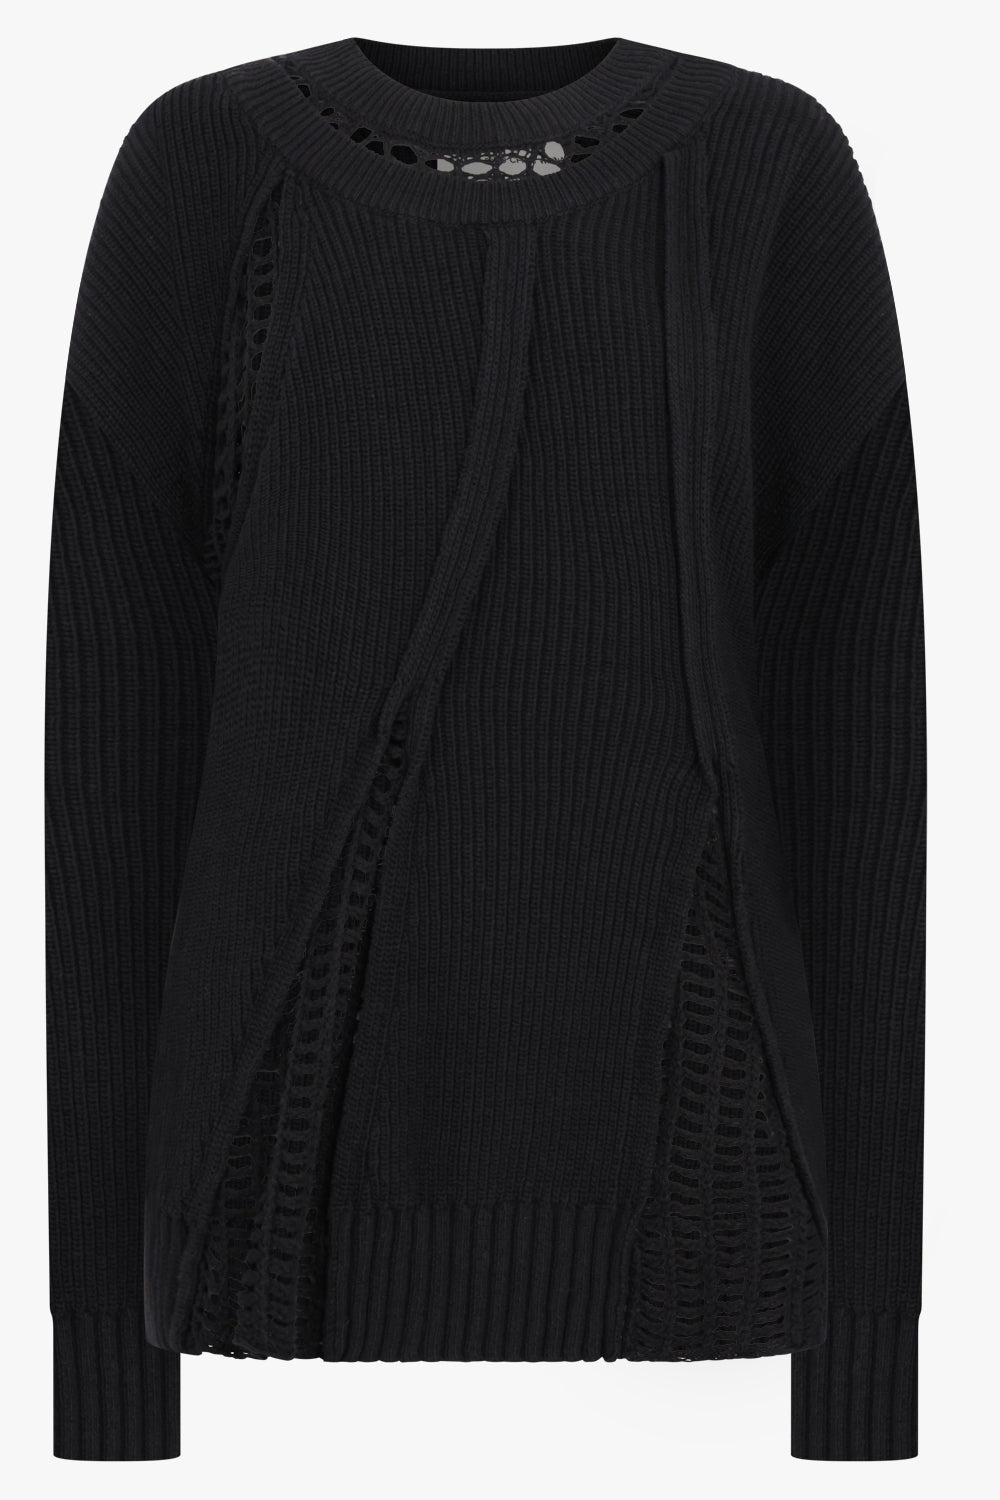 FENG CHEN WANG KNITWEAR 2 IN 1 JUMPER WITH MESH PANEL | BLACK